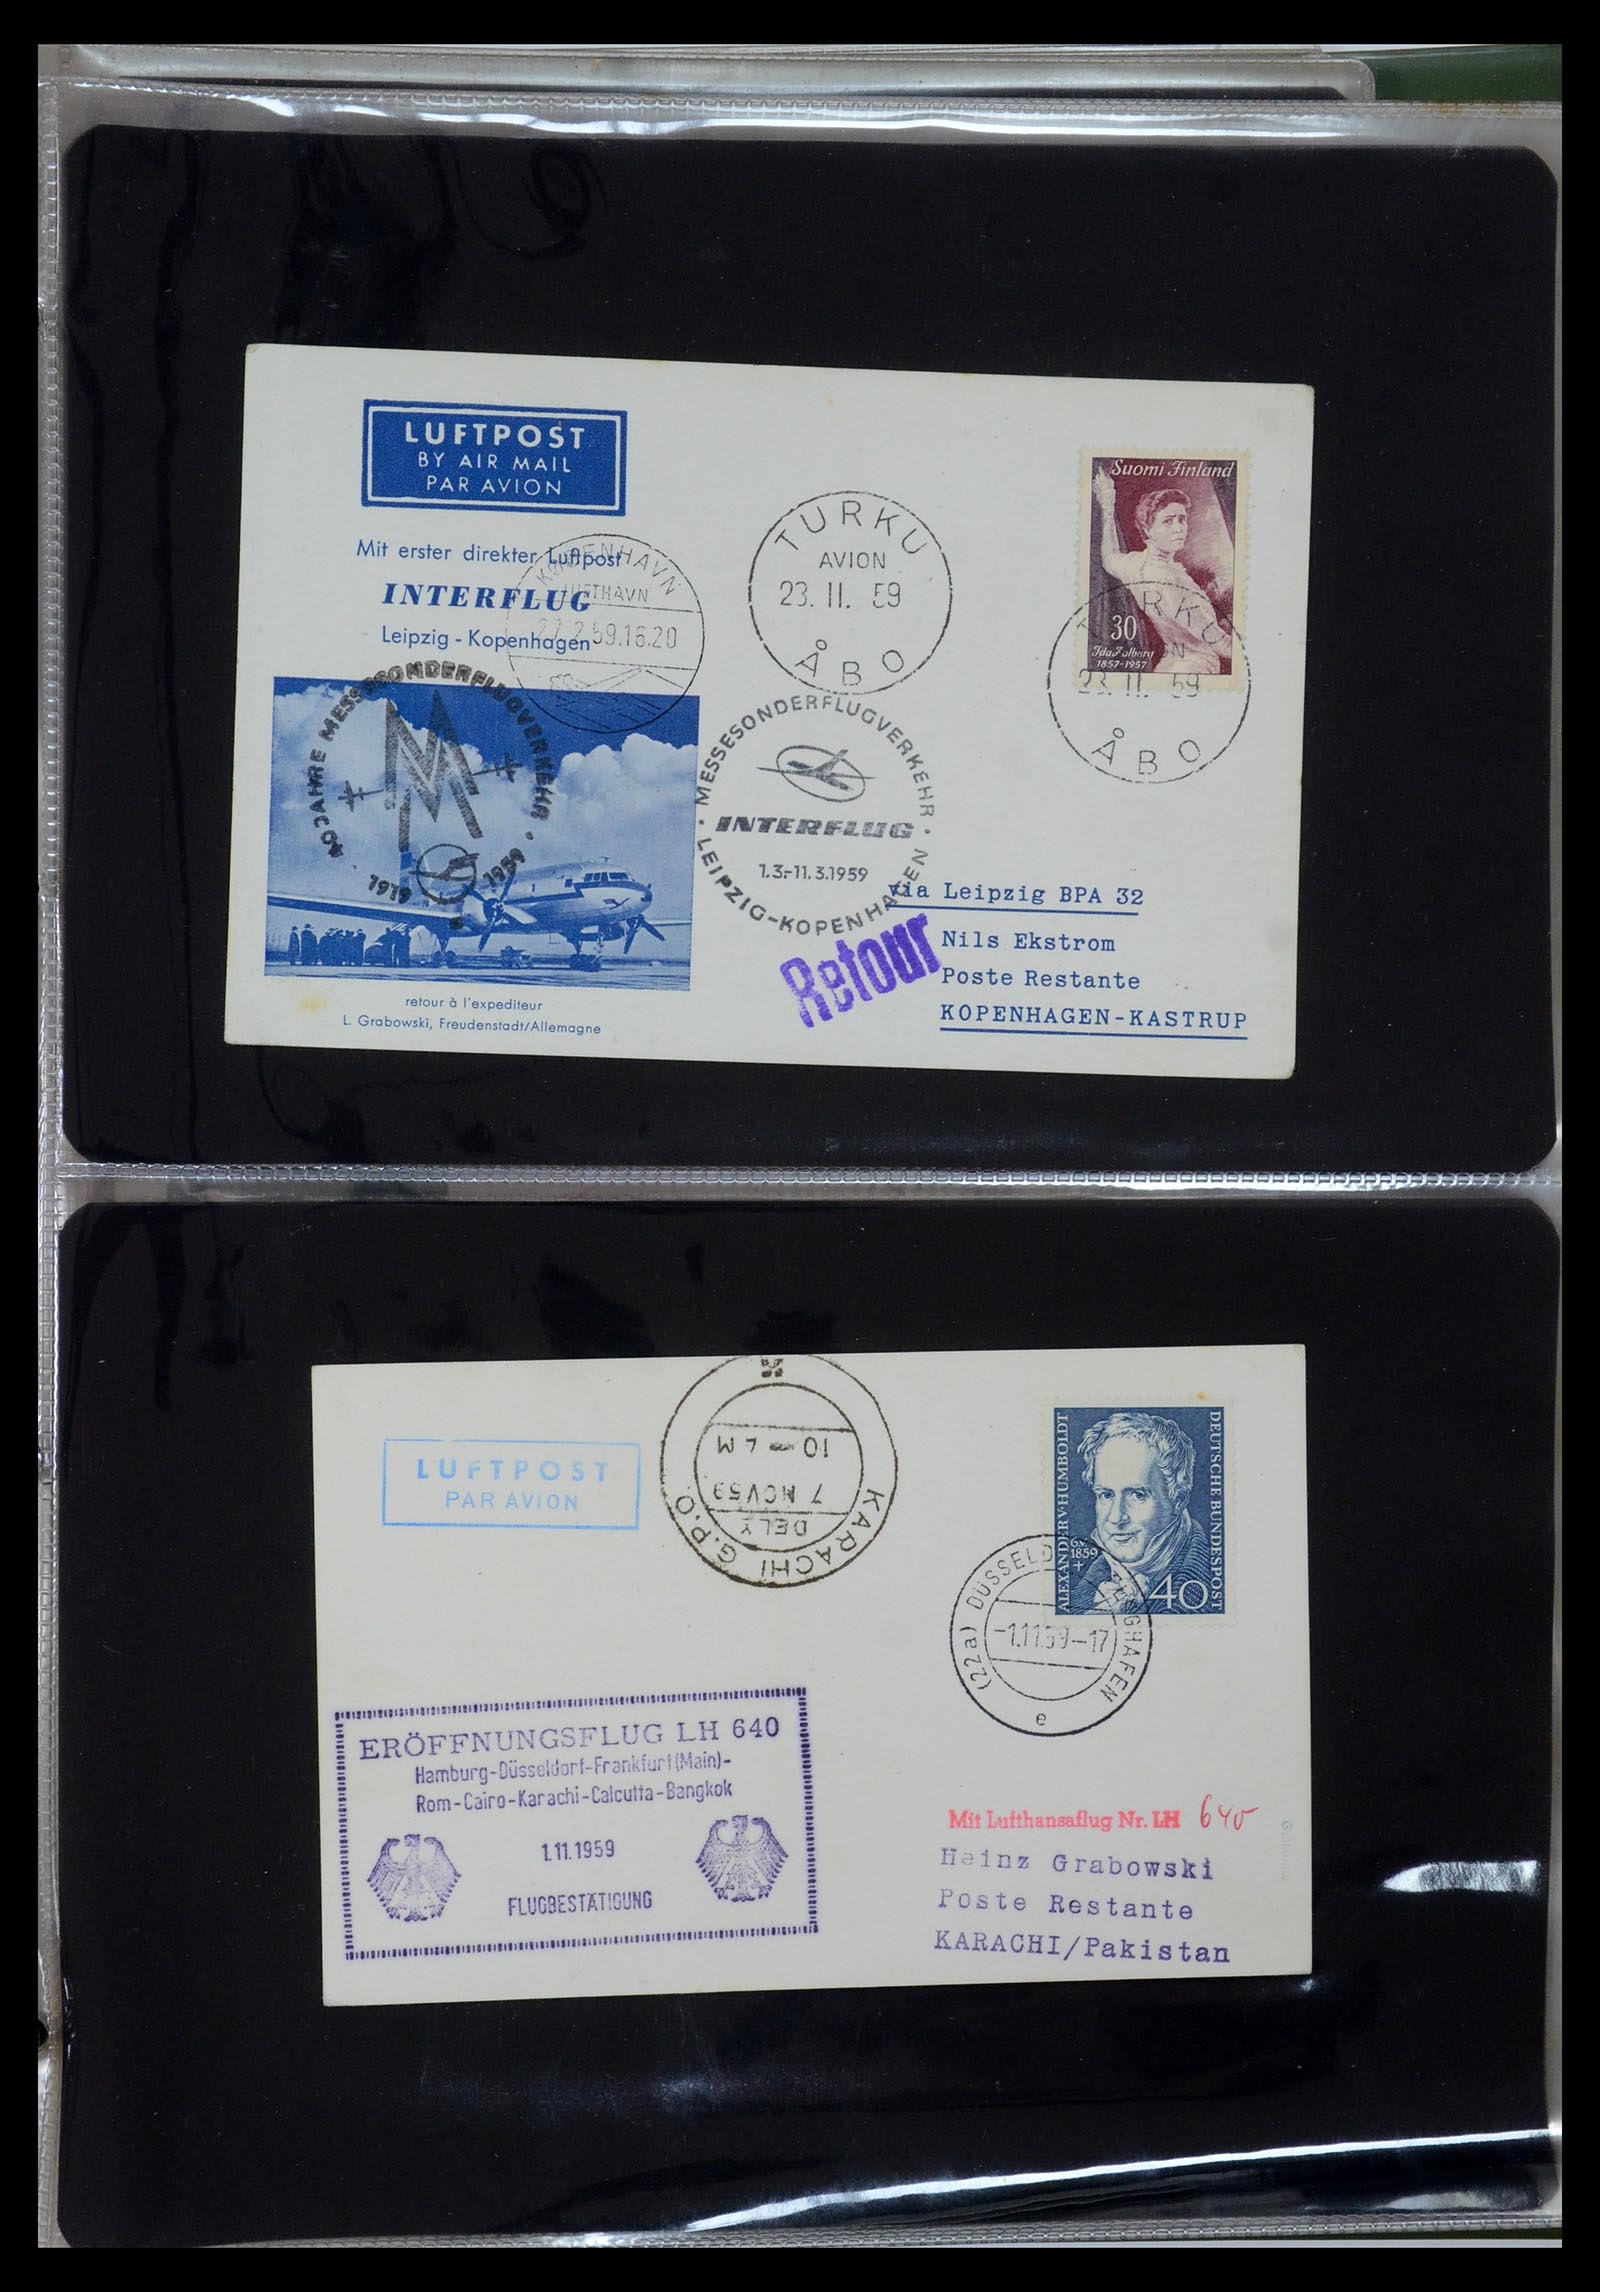 35736 098 - Stamp Collection 35736 World airmail covers.